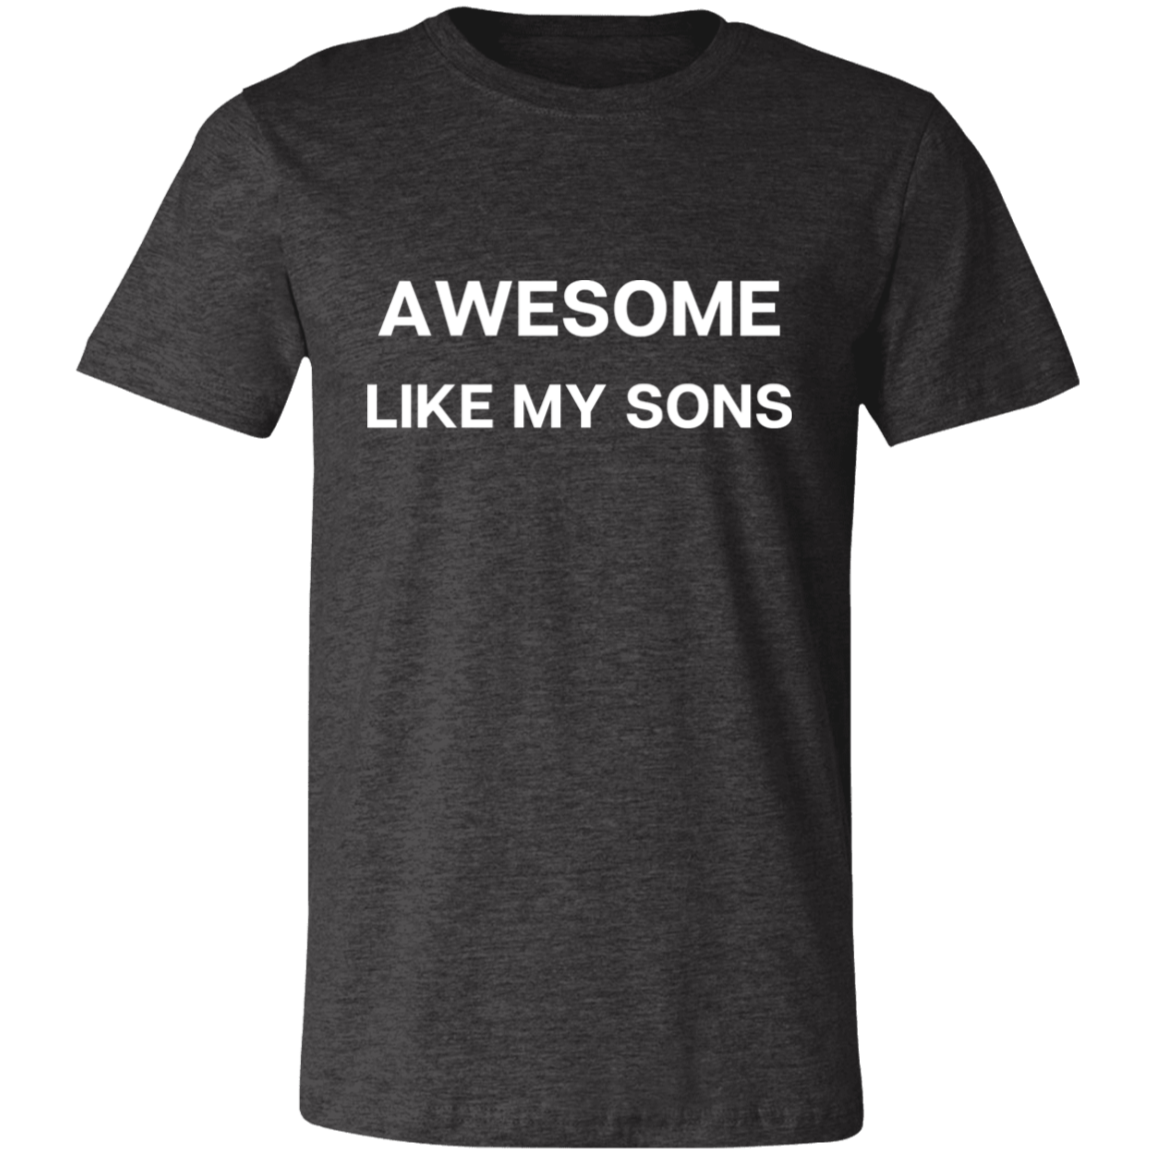 Awesome Like My Sons Short-Sleeve T-Shirt